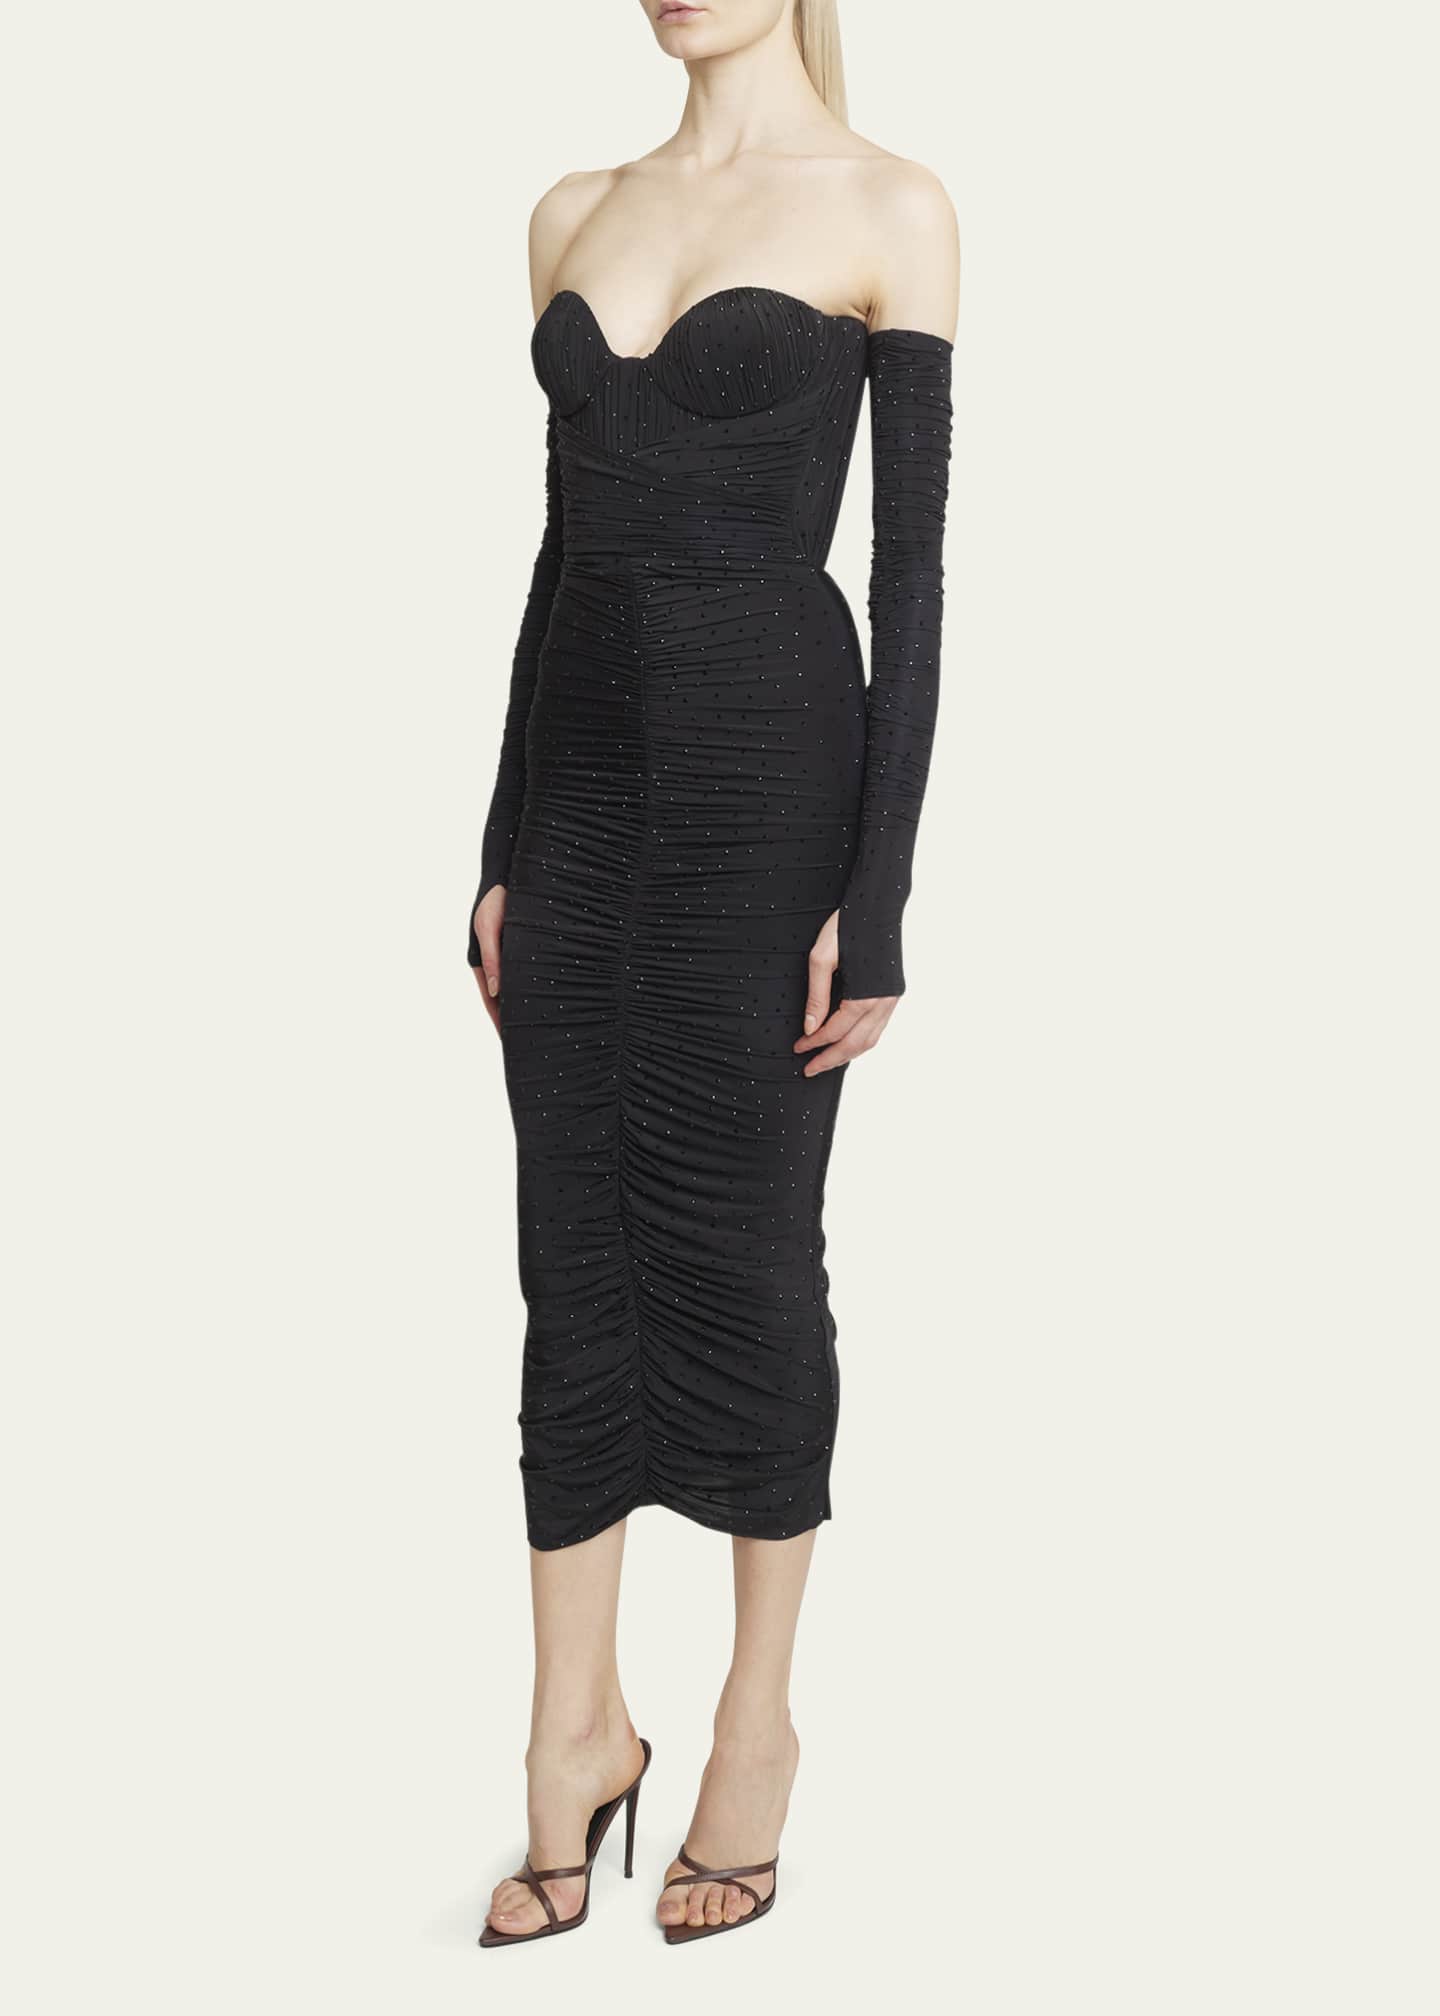 Alex Perry Crystal Strapless Ruched Midi Dress with Gloves - Bergdorf ...